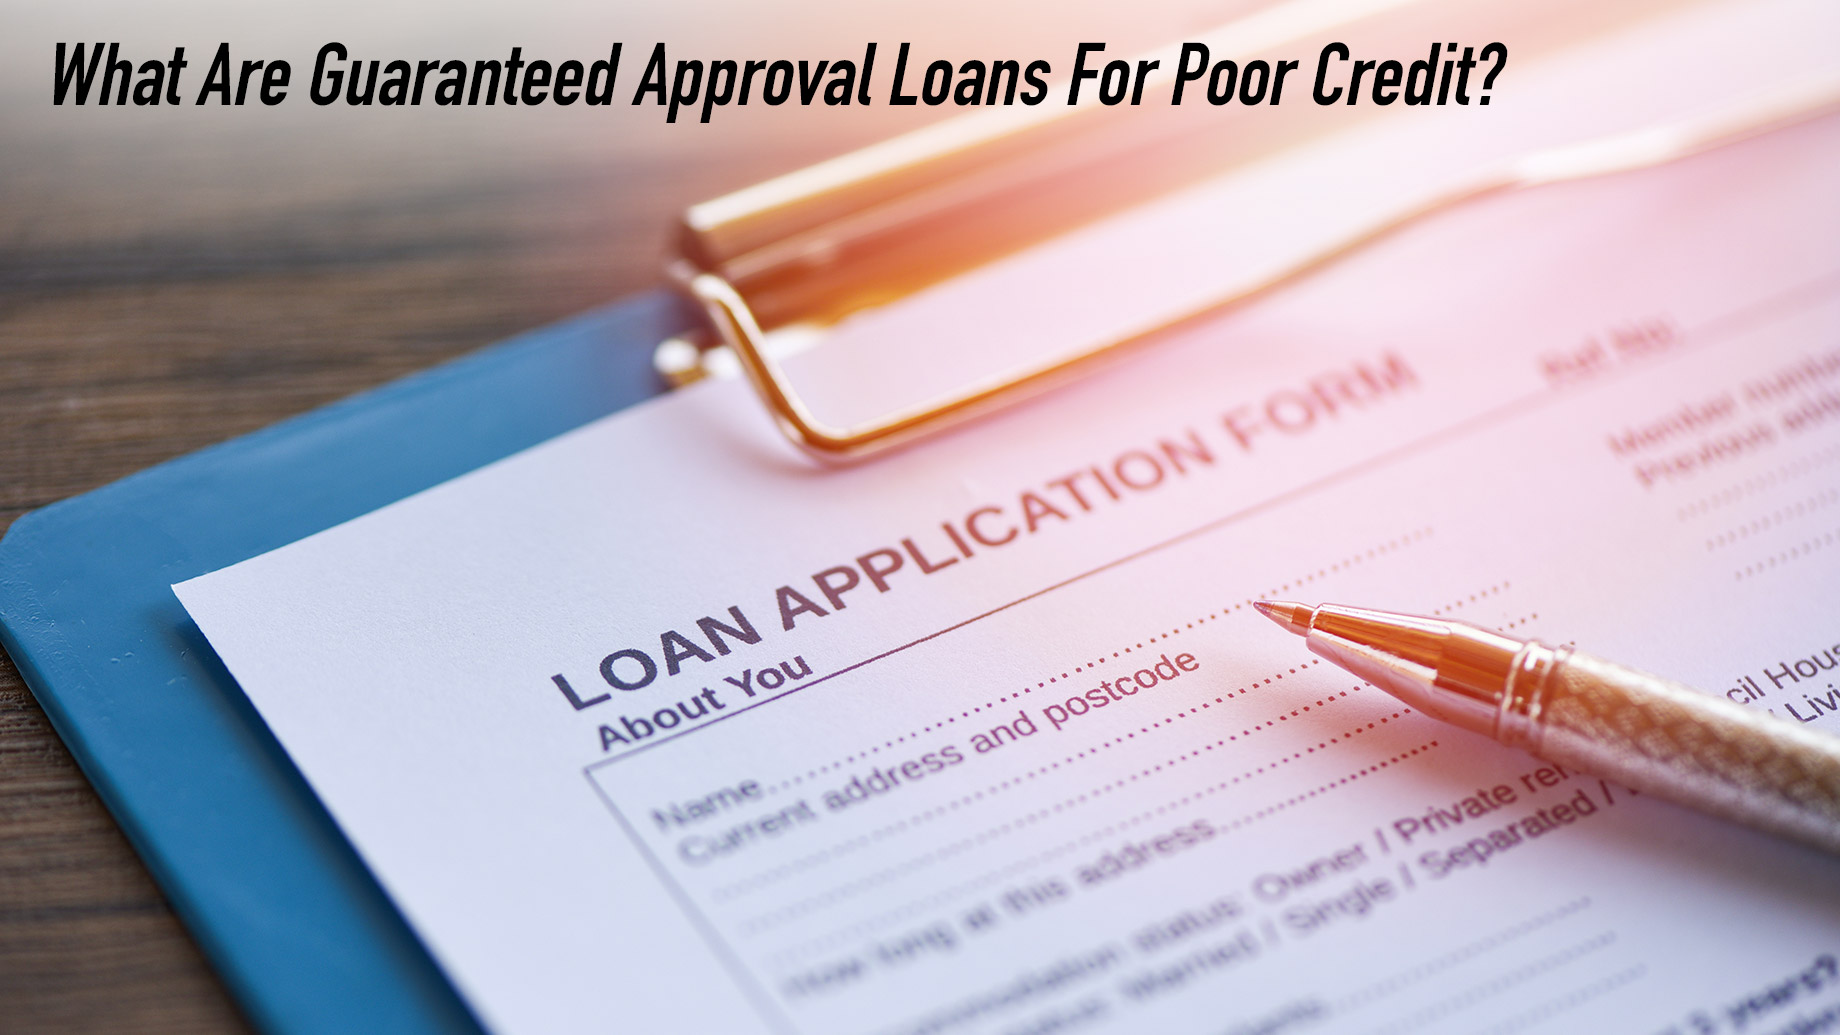 What Are Guaranteed Approval Loans For Poor Credit?